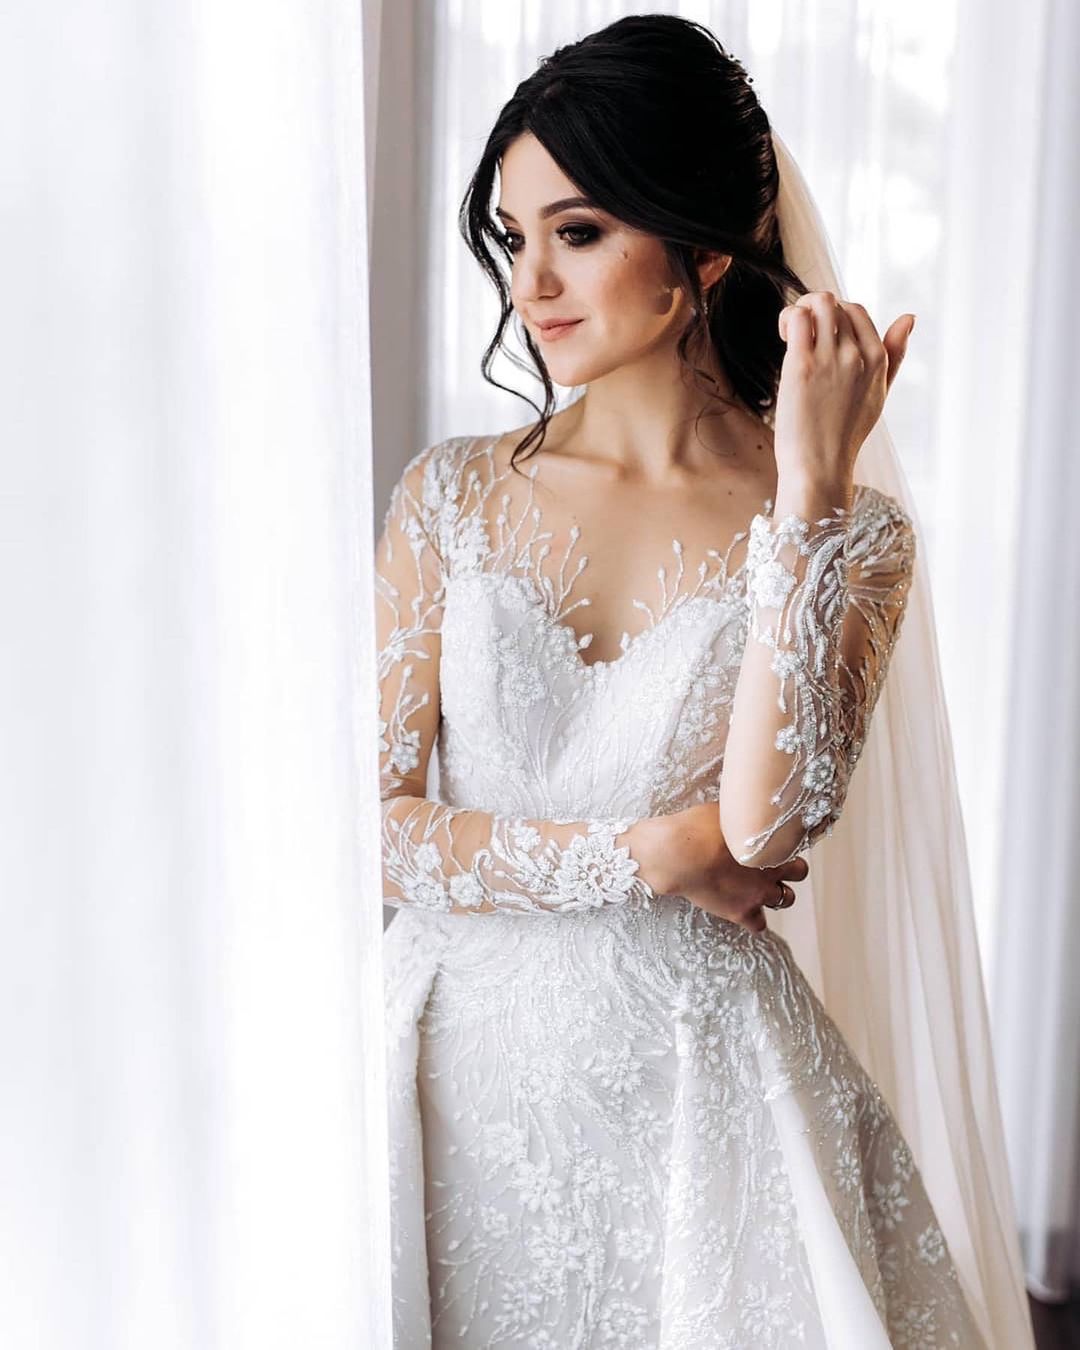 Angeli - Long Sleeve Floral Lace Wedding Dress with Overskirt